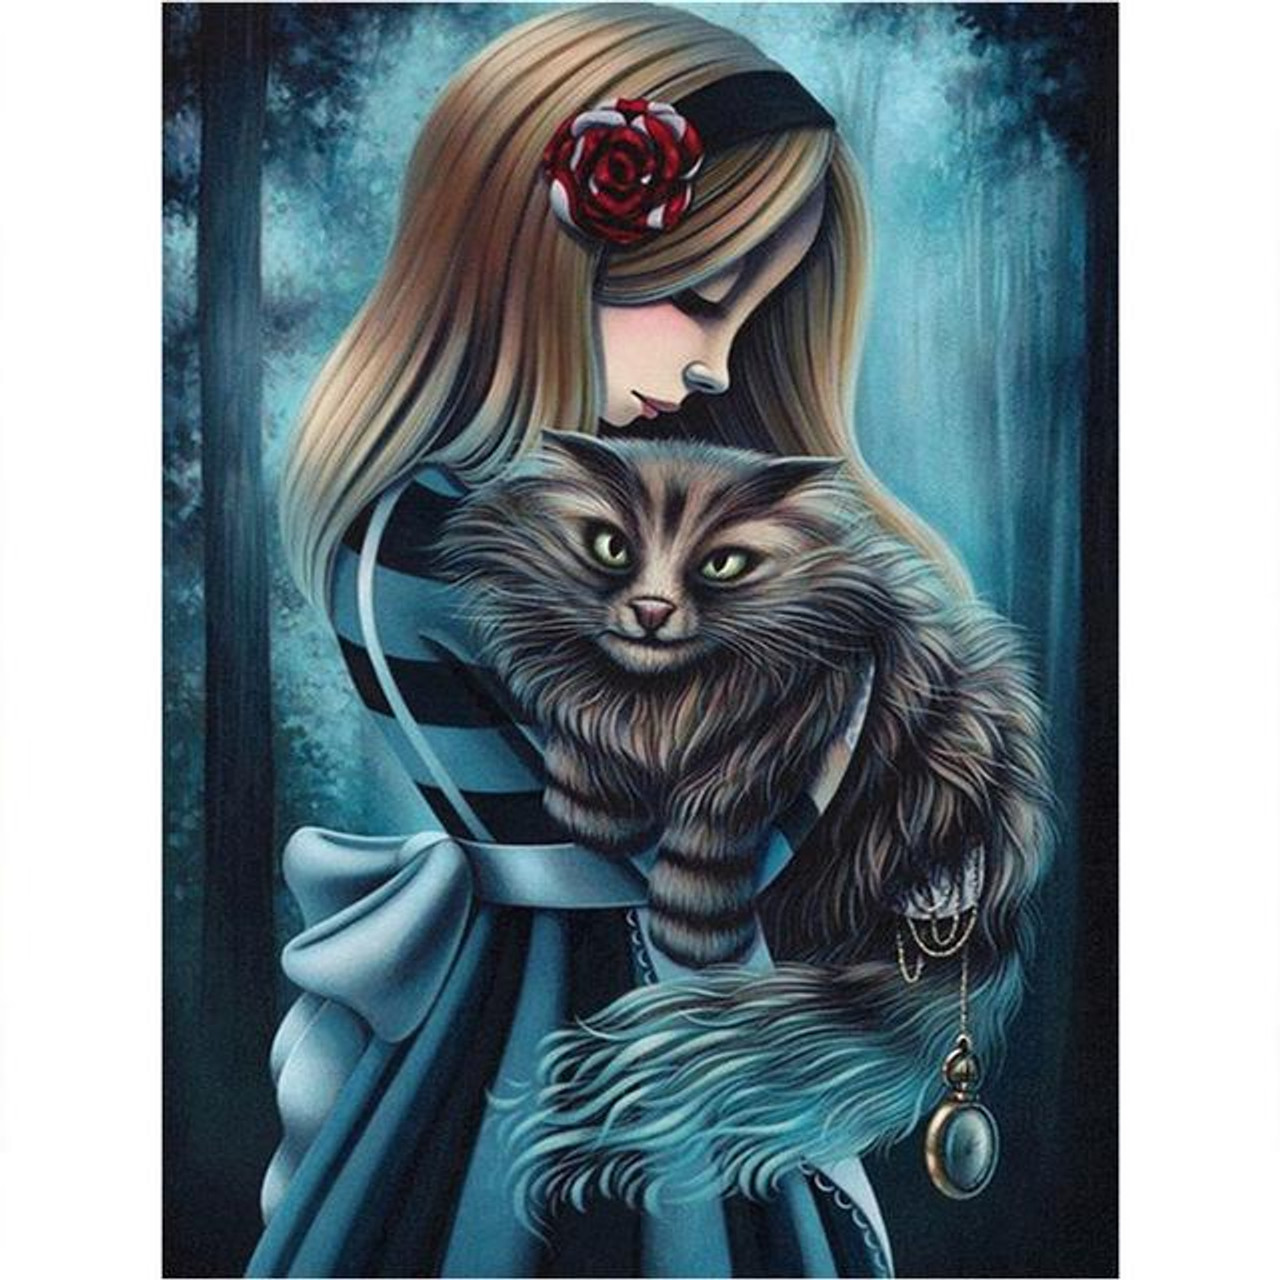 5D Diamond Painting Alice and the Cheshire Cat Kit